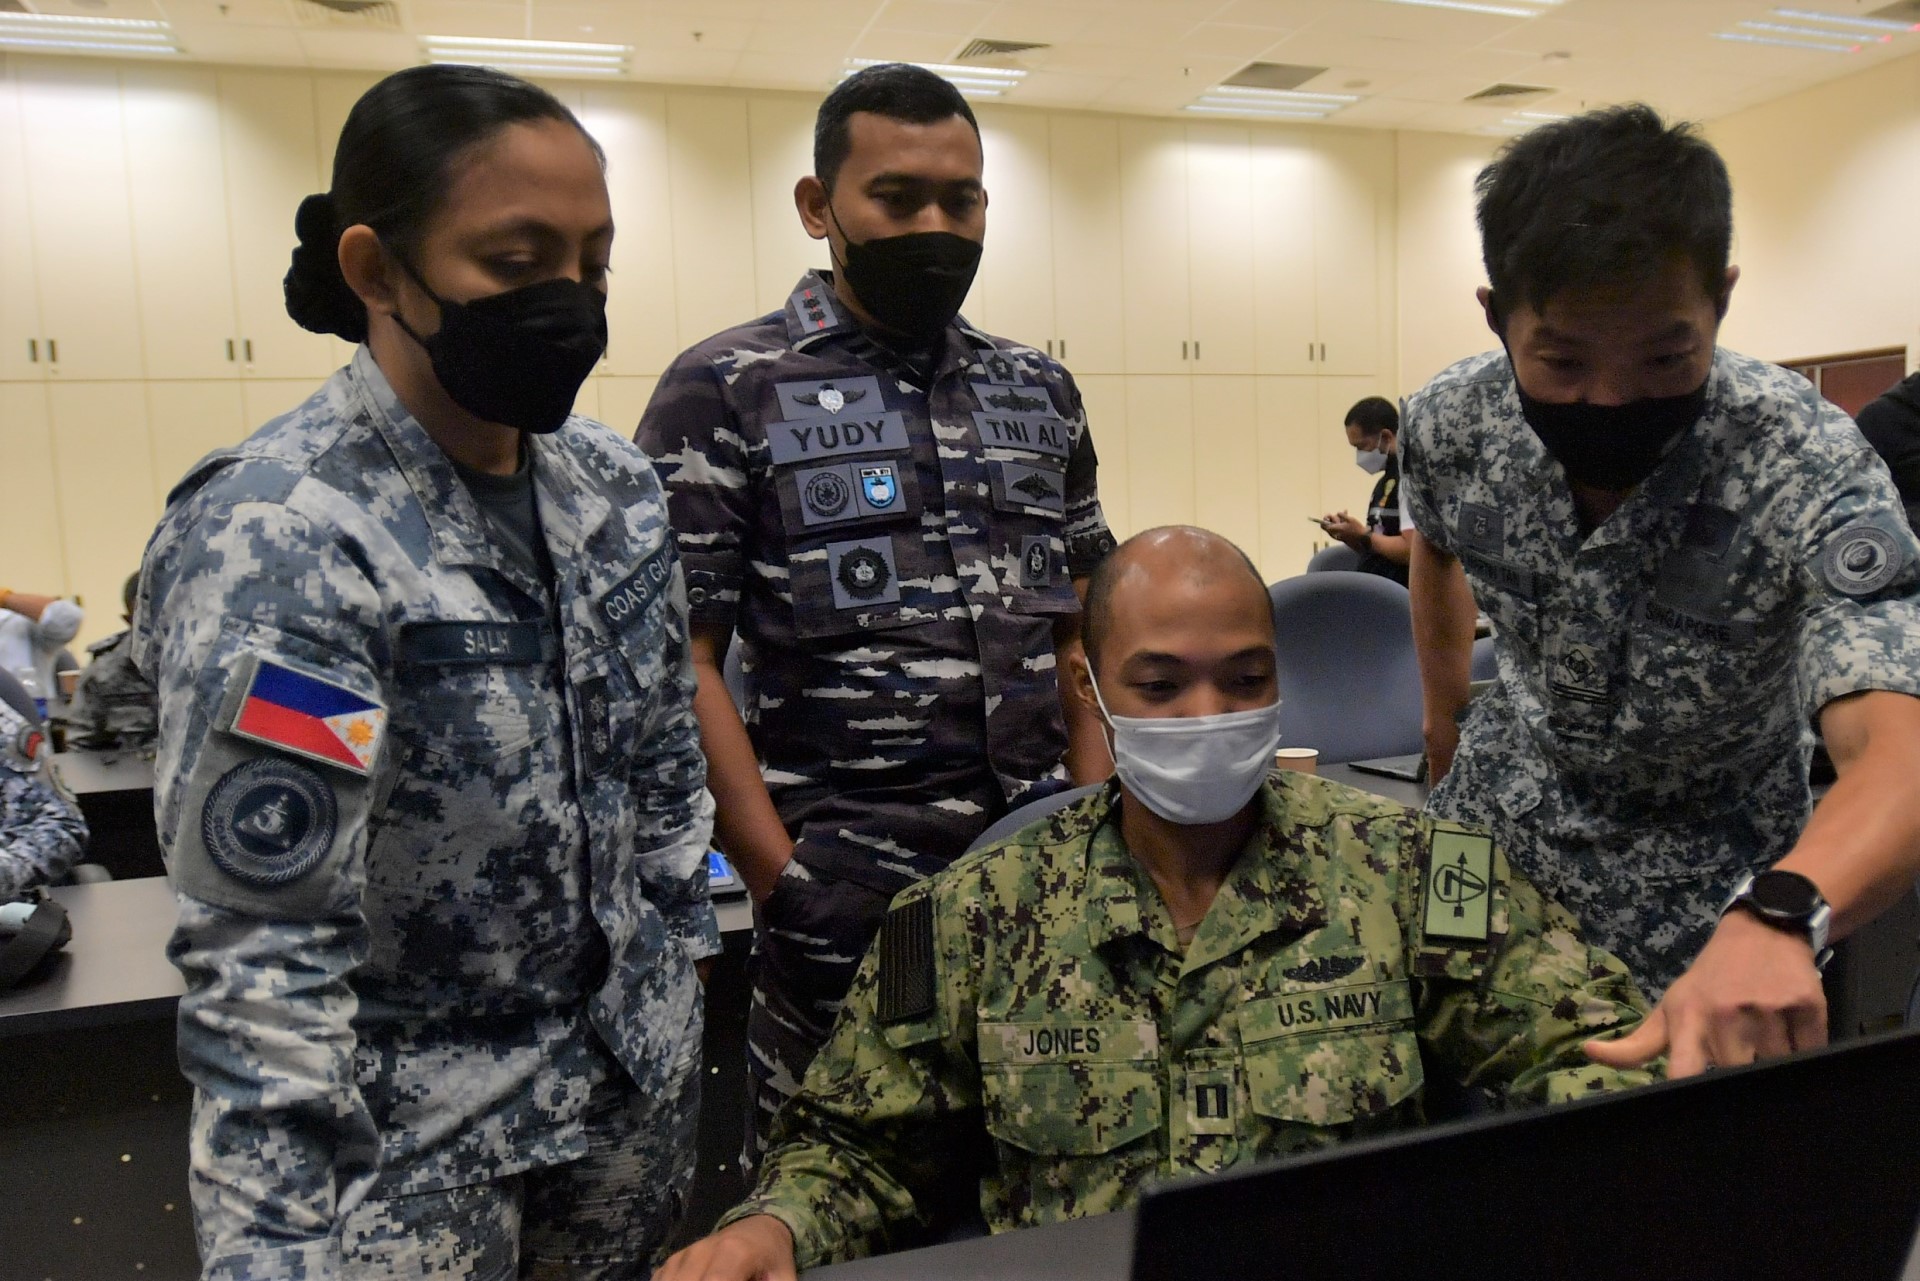 Exercise SEACAT participants utilised the Information Fusion Centre (IFC) Real-time Information-sharing System to build common maritime situational awareness so that responses to maritime security threats could be coordinated during the sea phase of the exercise.